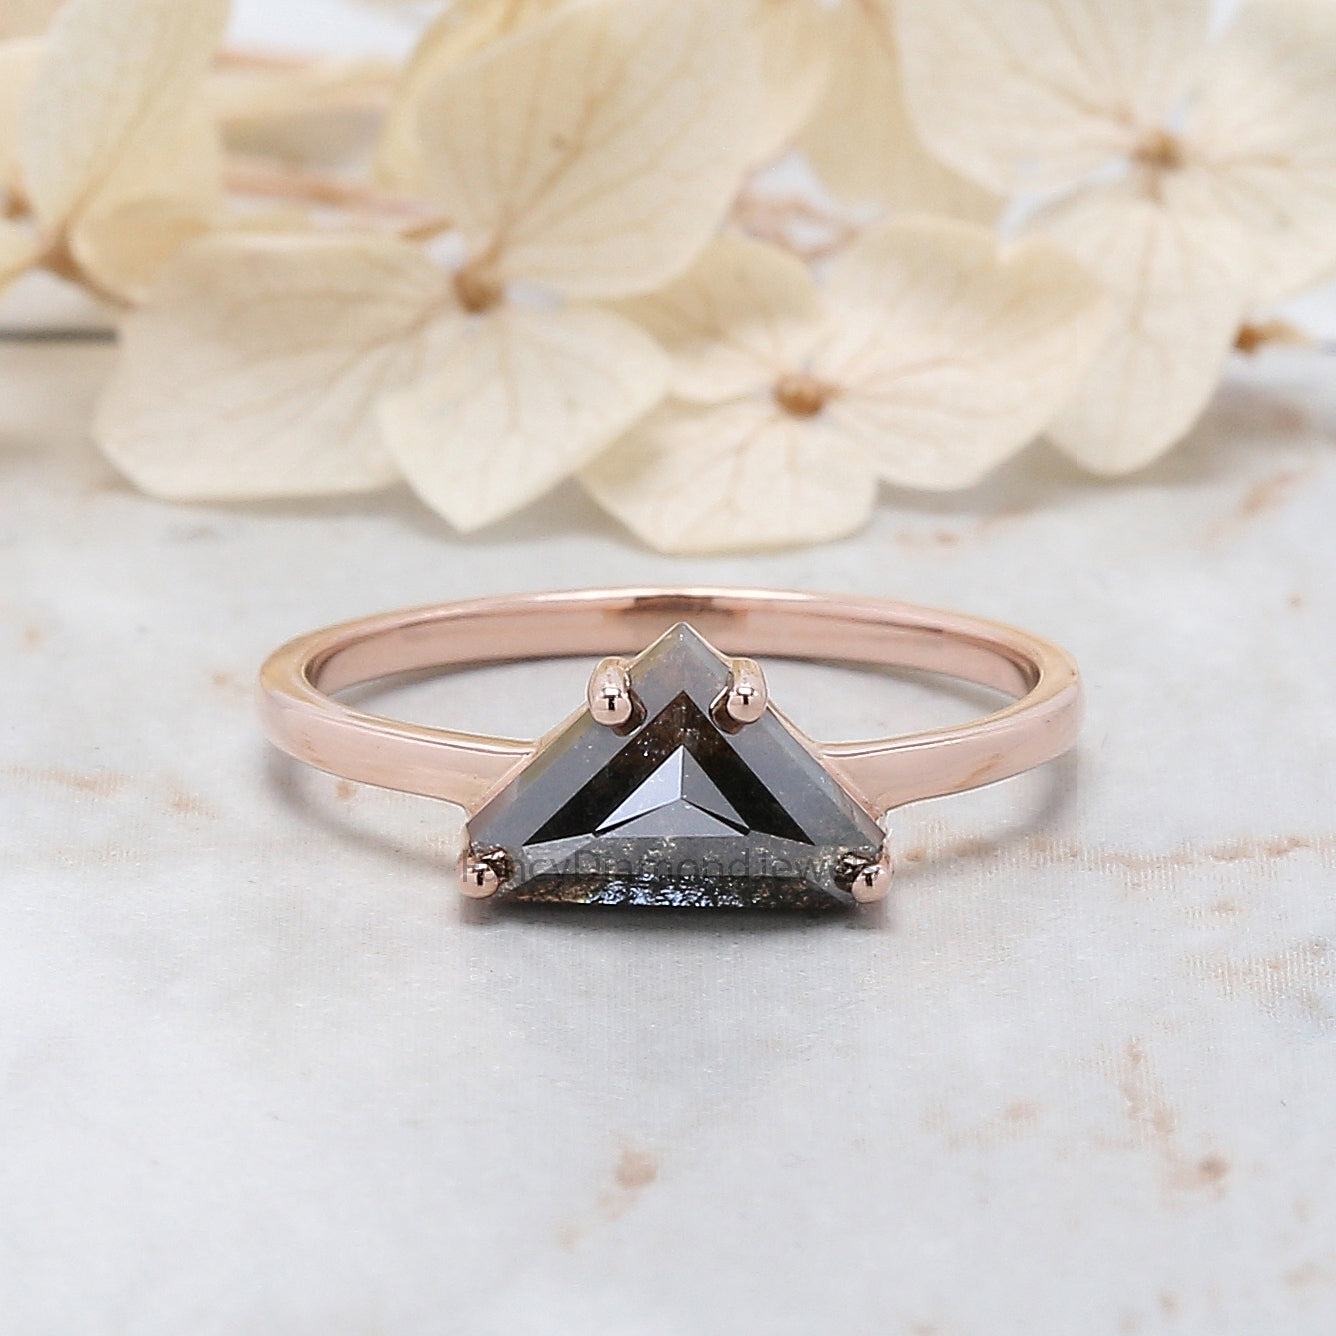 Shield Shape Brown Color Diamond Ring 1.18 Ct 6.25 MM Shield Diamond Ring 14K Solid Rose Gold Silver Engagement Ring Gift For Her QN9124